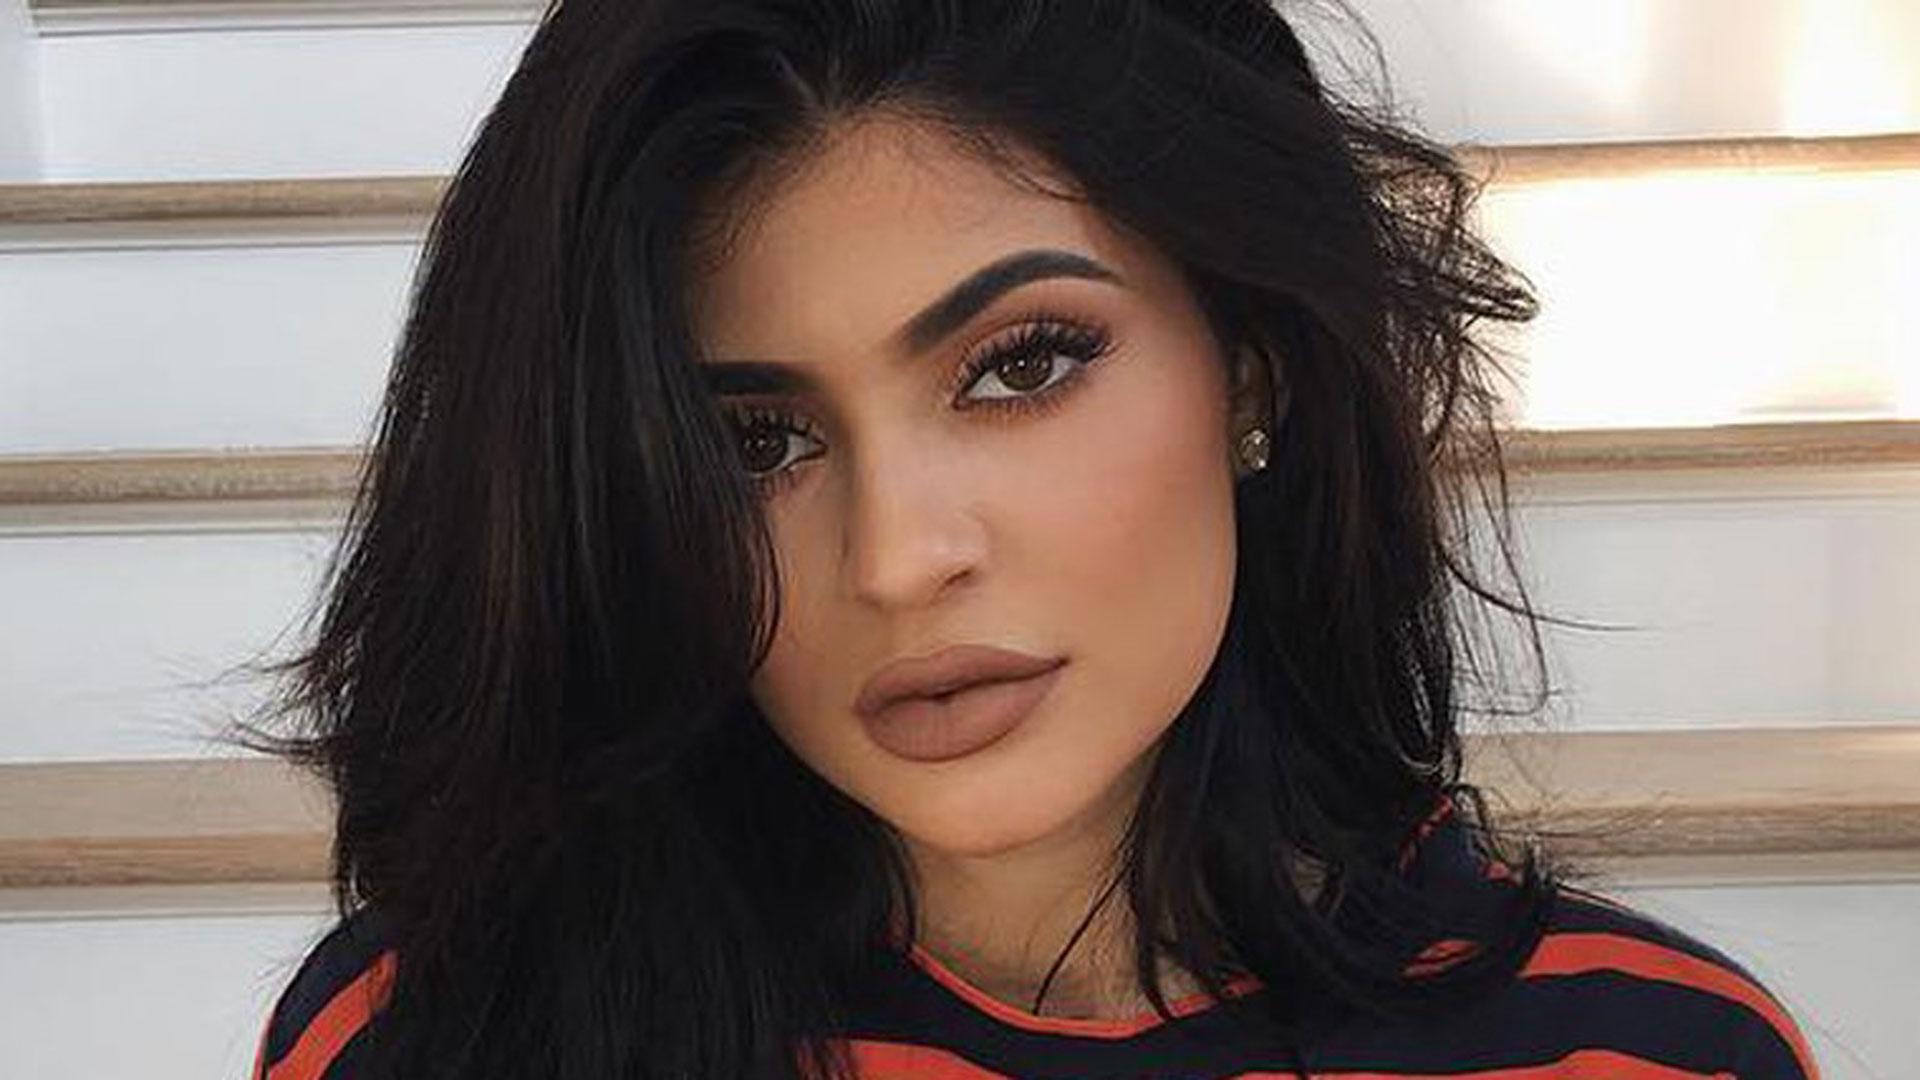 Wanted to be a makeup artist; facts about Kylie Jenner, world's